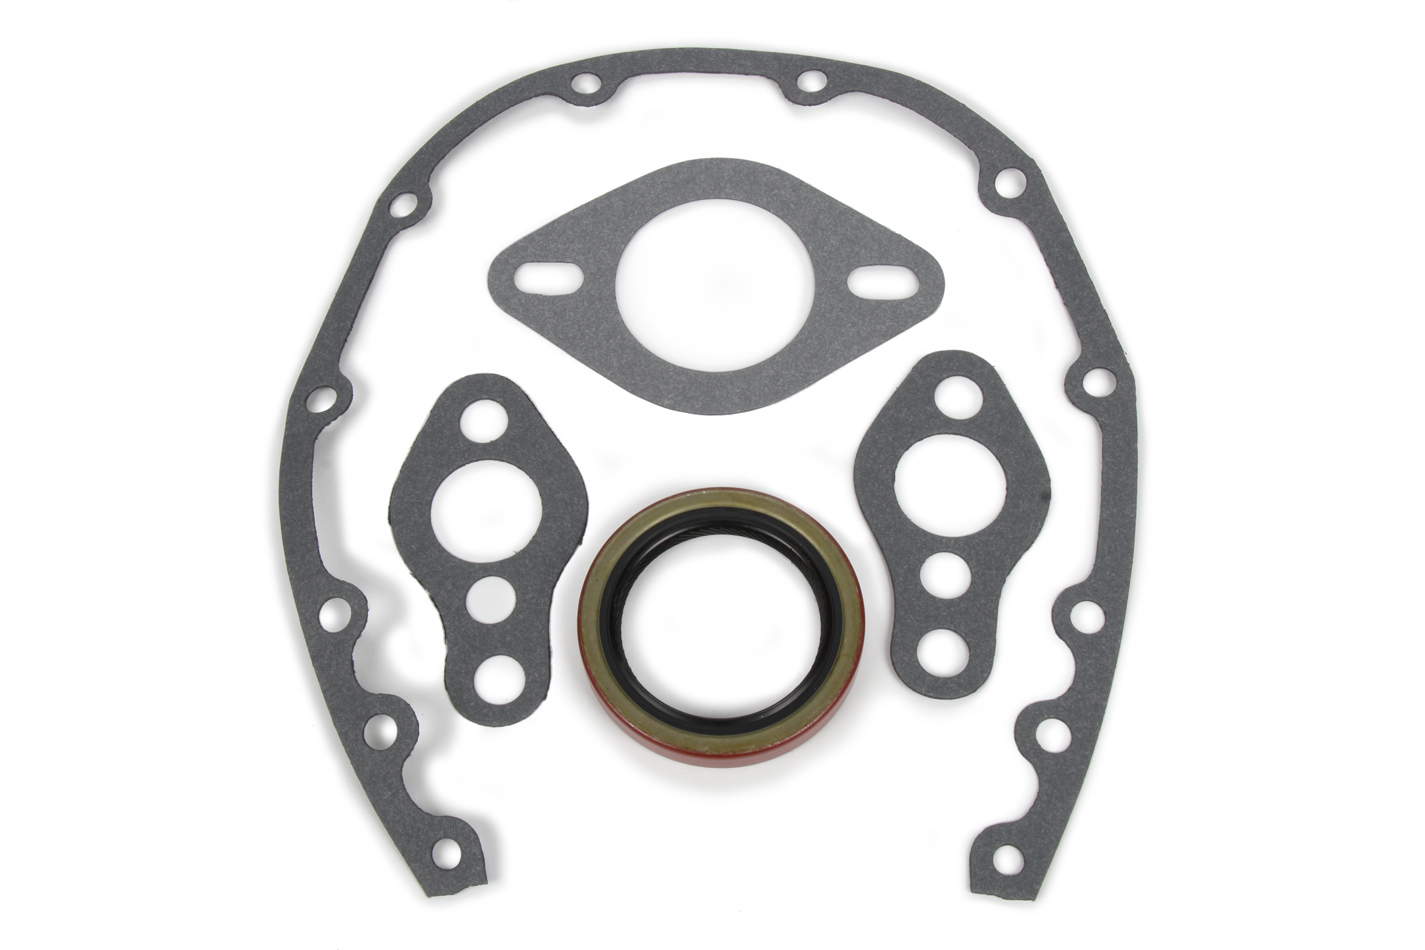 Trans Dapt 4364 Timing Cover Gasket, Seal Included, Composite, Small Block Chevy, Kit